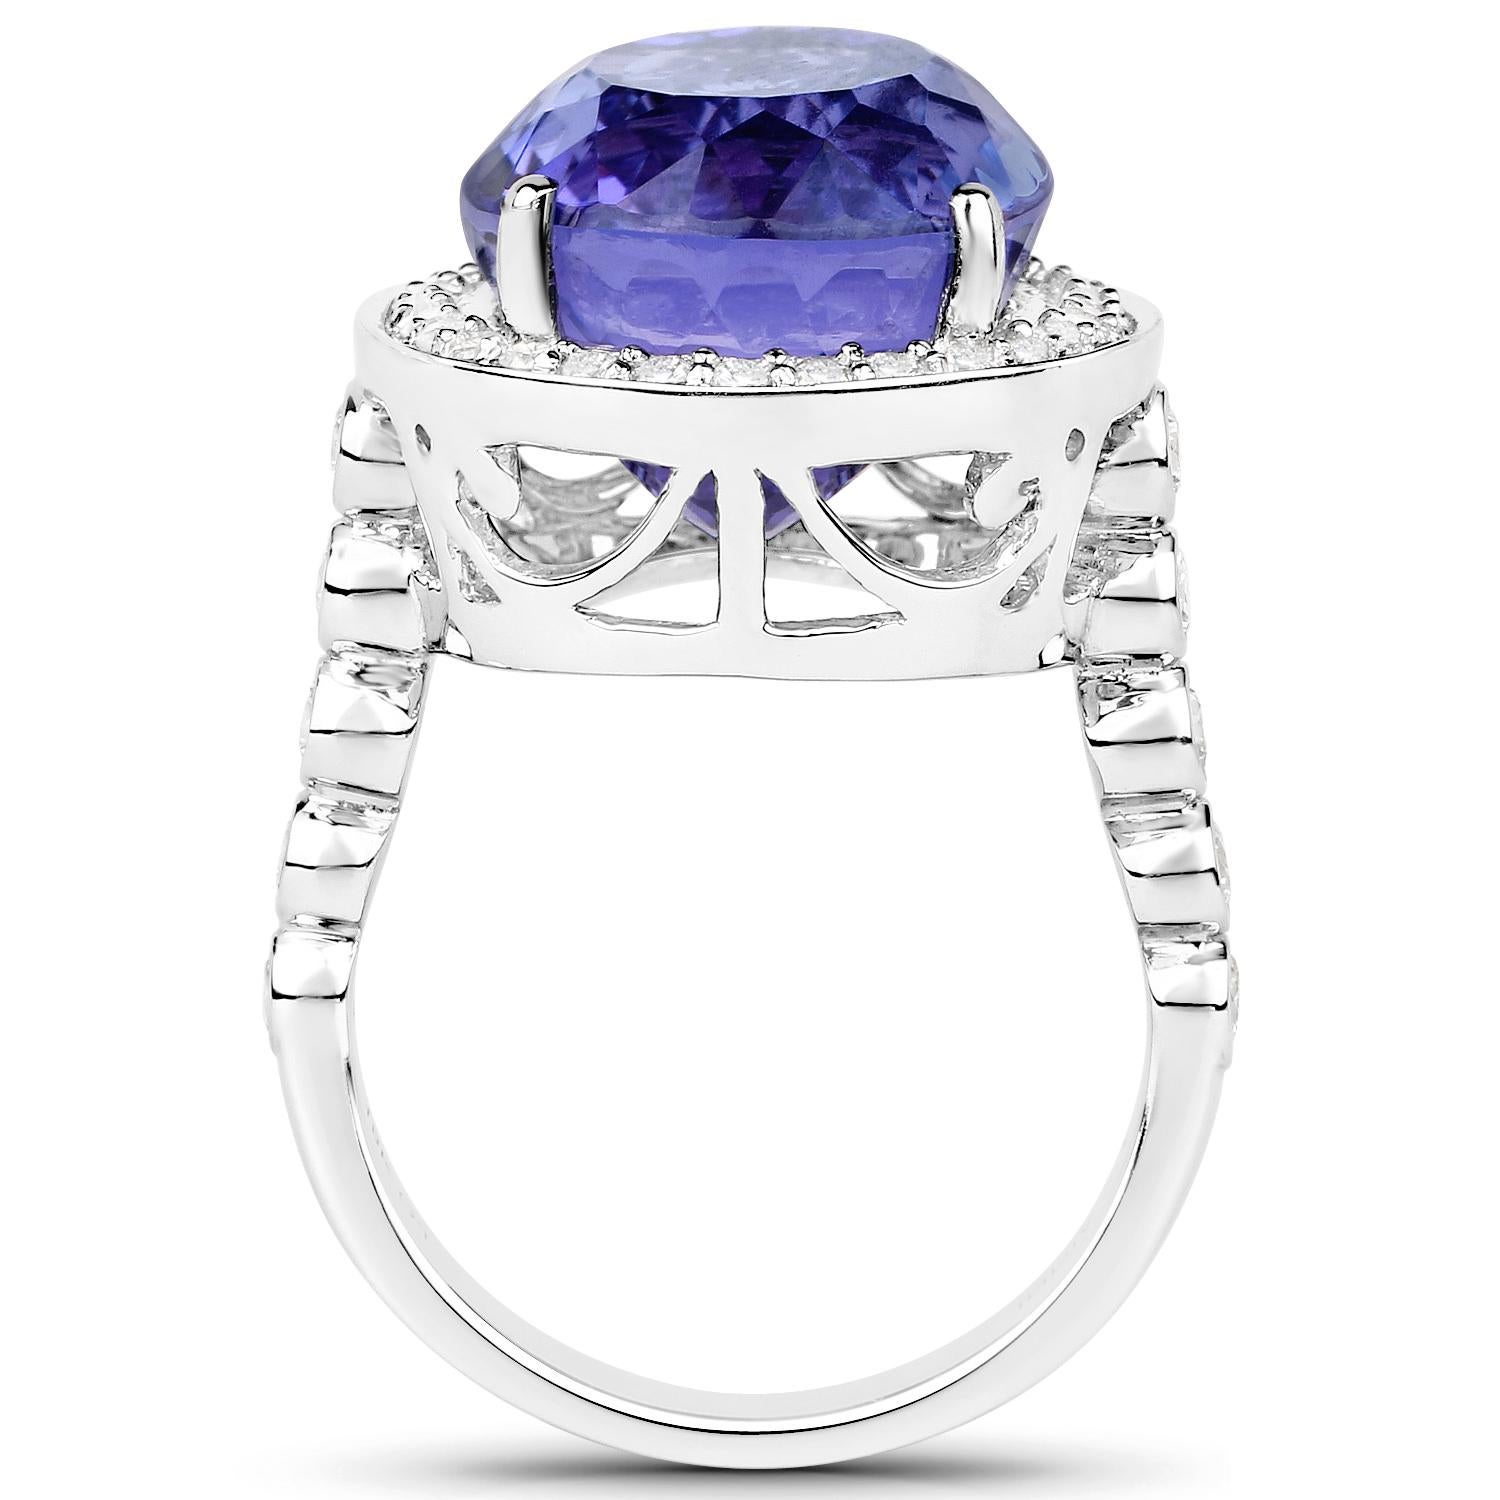 Important Tanzanite Ring Diamond Setting 18.5 Carats 18K White Gold In Excellent Condition For Sale In Laguna Niguel, CA